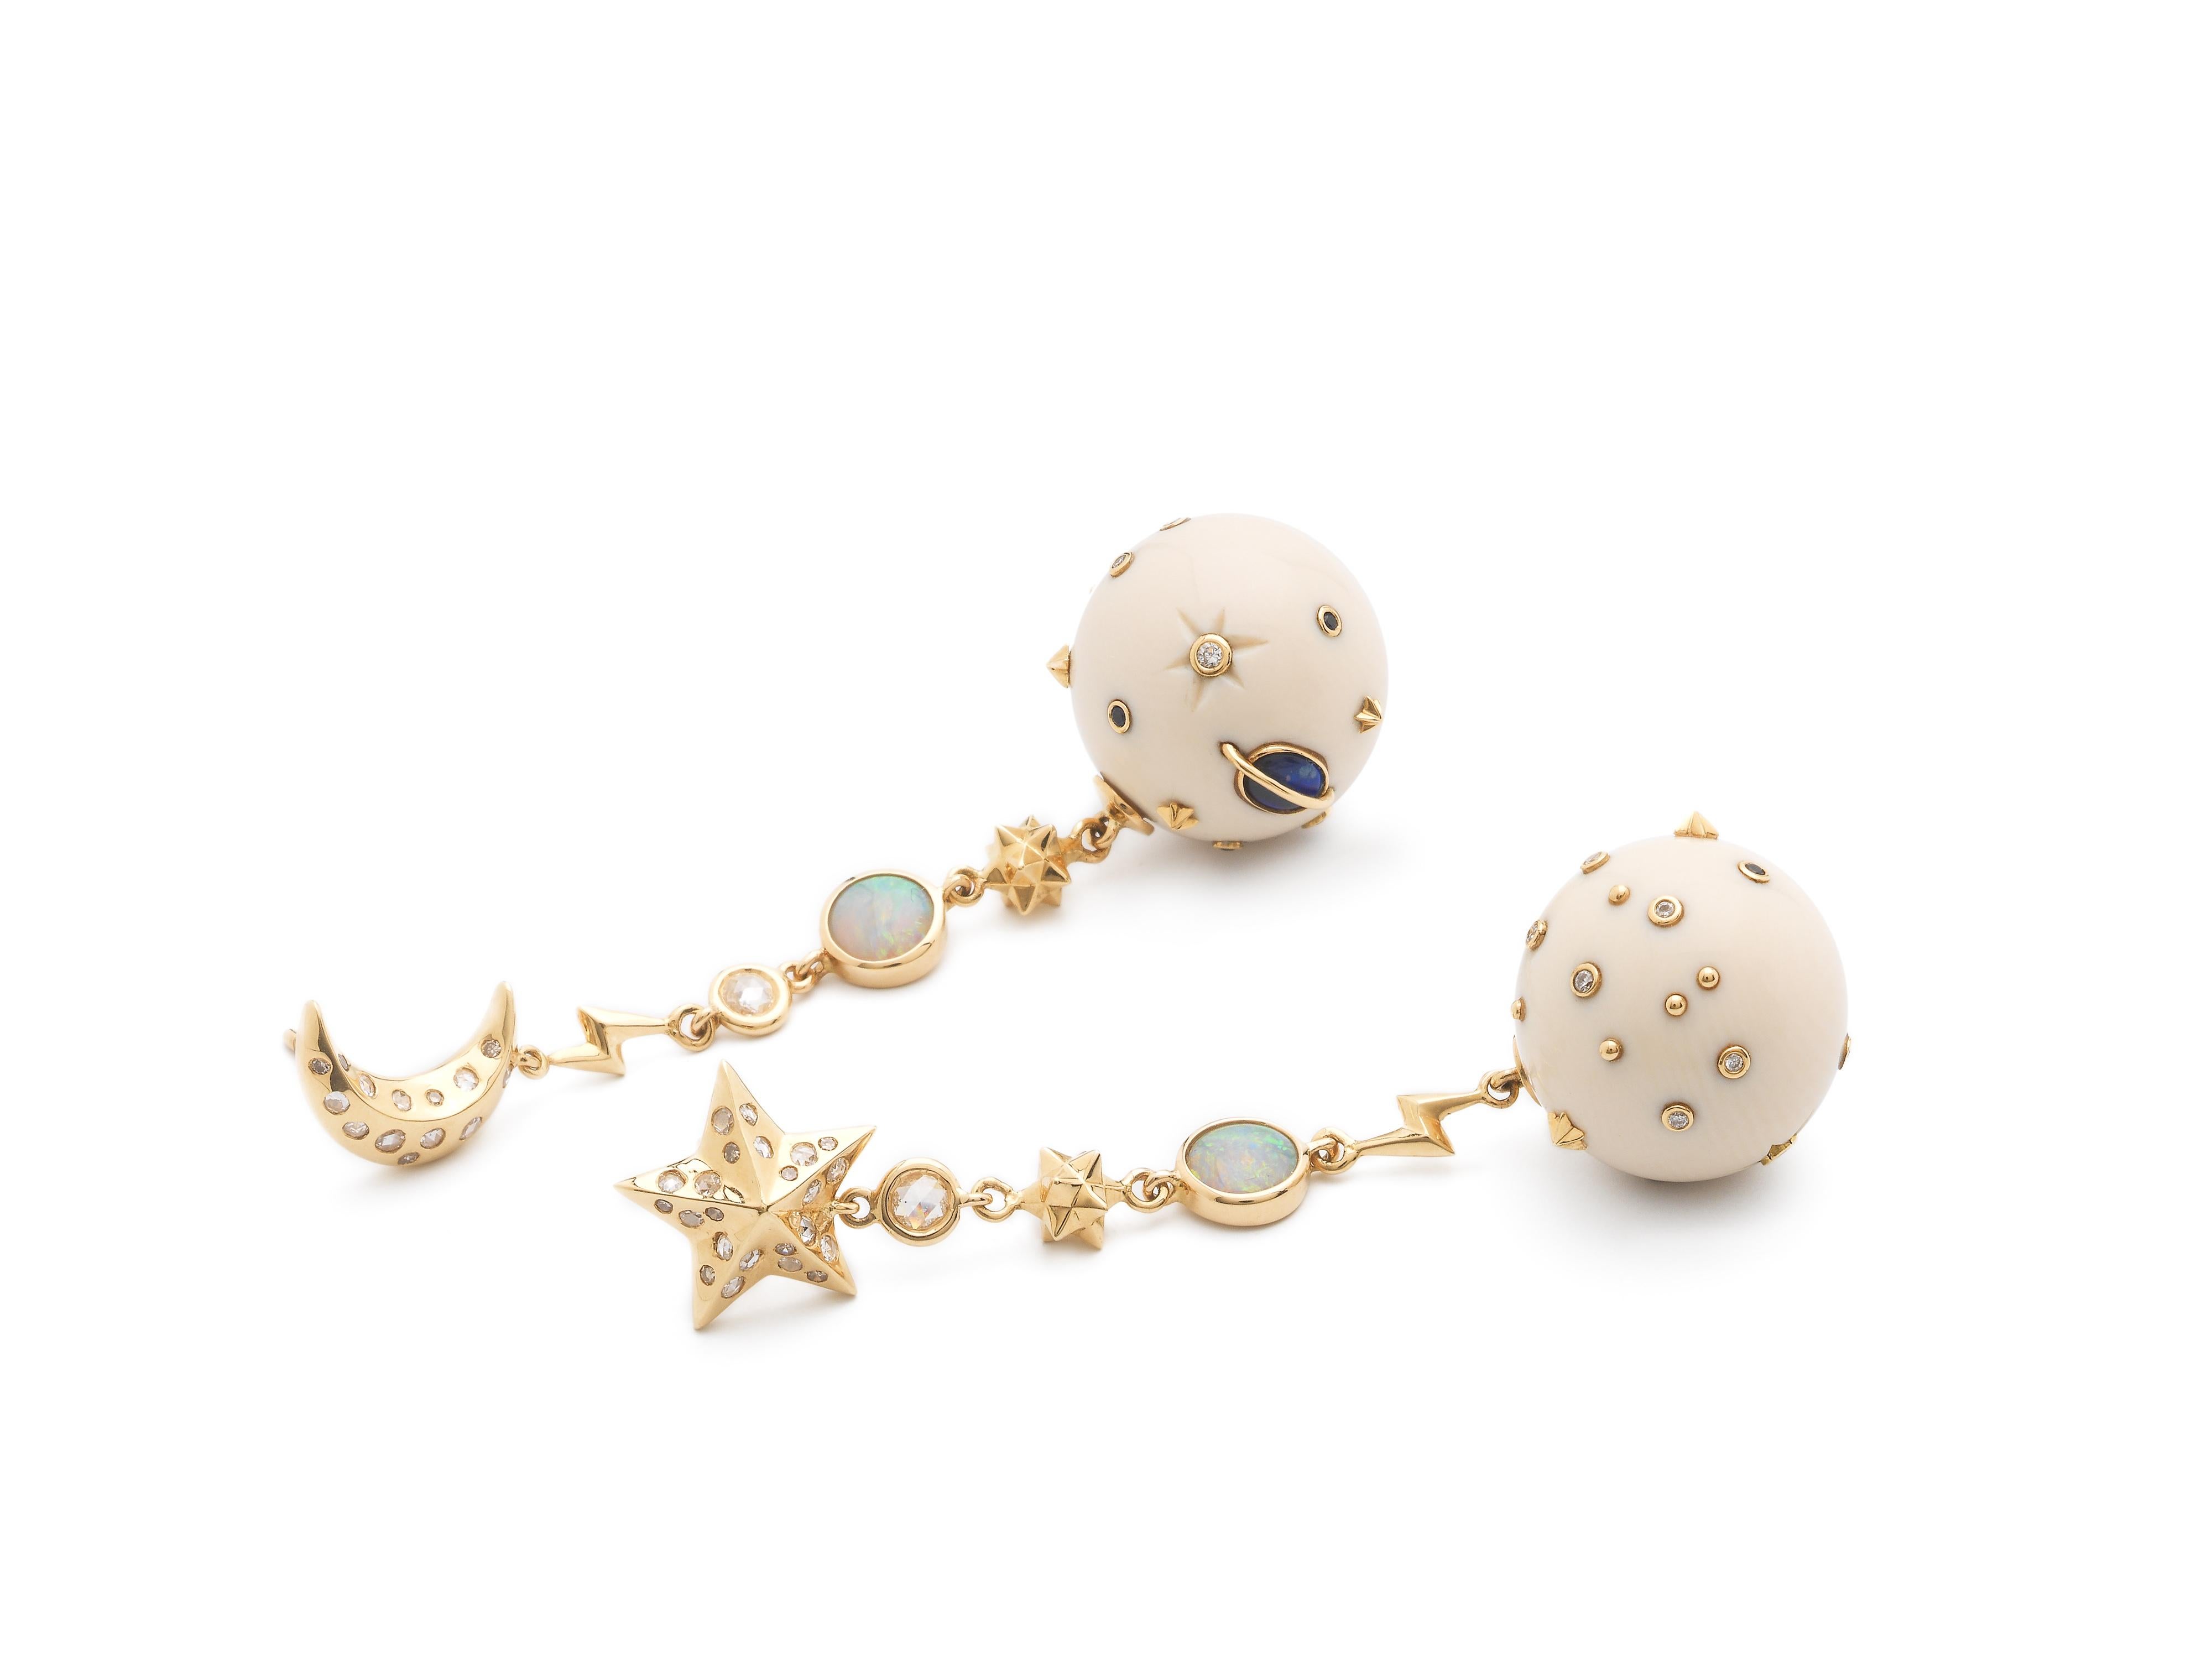 Carved in 60,000-year-old mammoth tusk – which is surprisingly light to wear – the Star and Moon Mammoth Galaxy Earrings are designed as two mammoth orbs set with white diamonds, blue sapphires, opals, and 18k yellow gold accents. The drop earrings